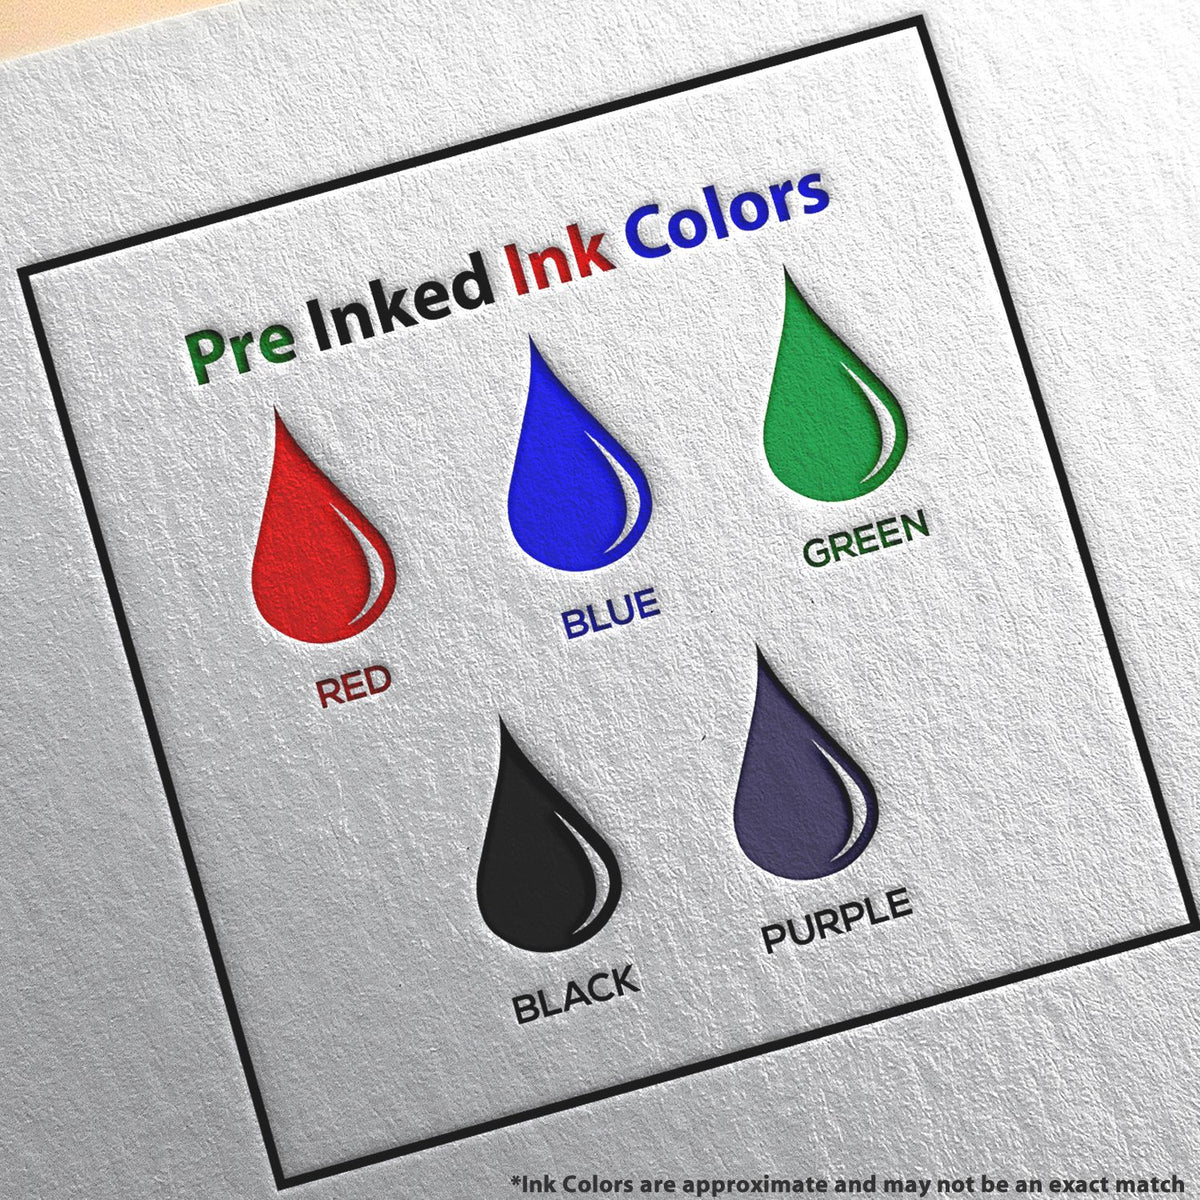 A picture showing the different ink colors or hues available for the MaxLight Premium Pre-Inked New Jersey State Seal Notarial Stamp product.